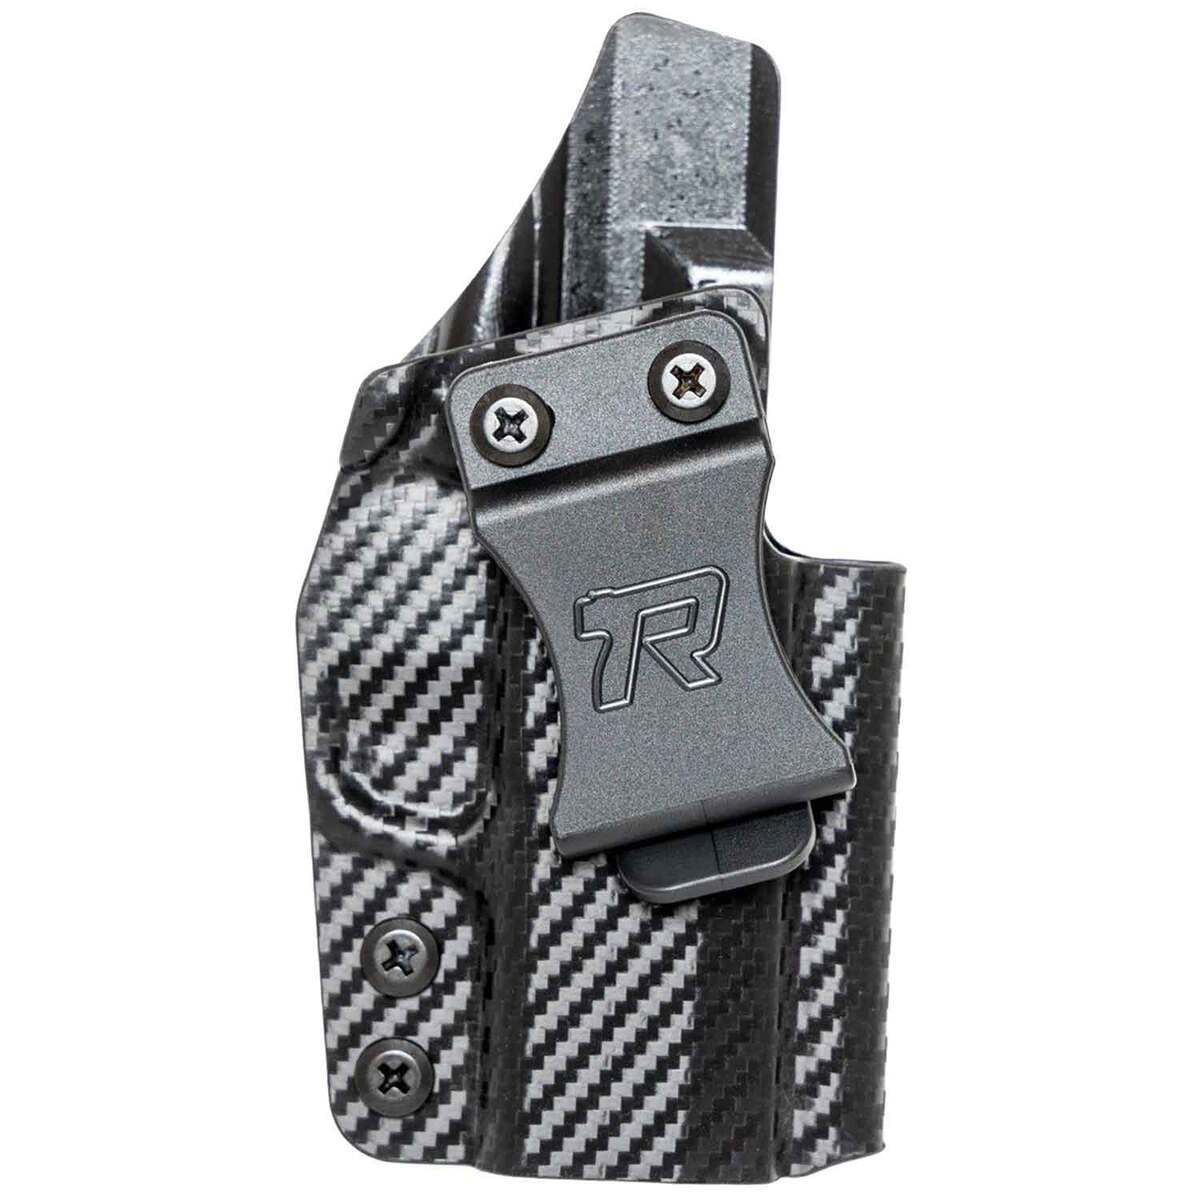 Sweat Guard Conceal Carry Holster - Active Pro Gear